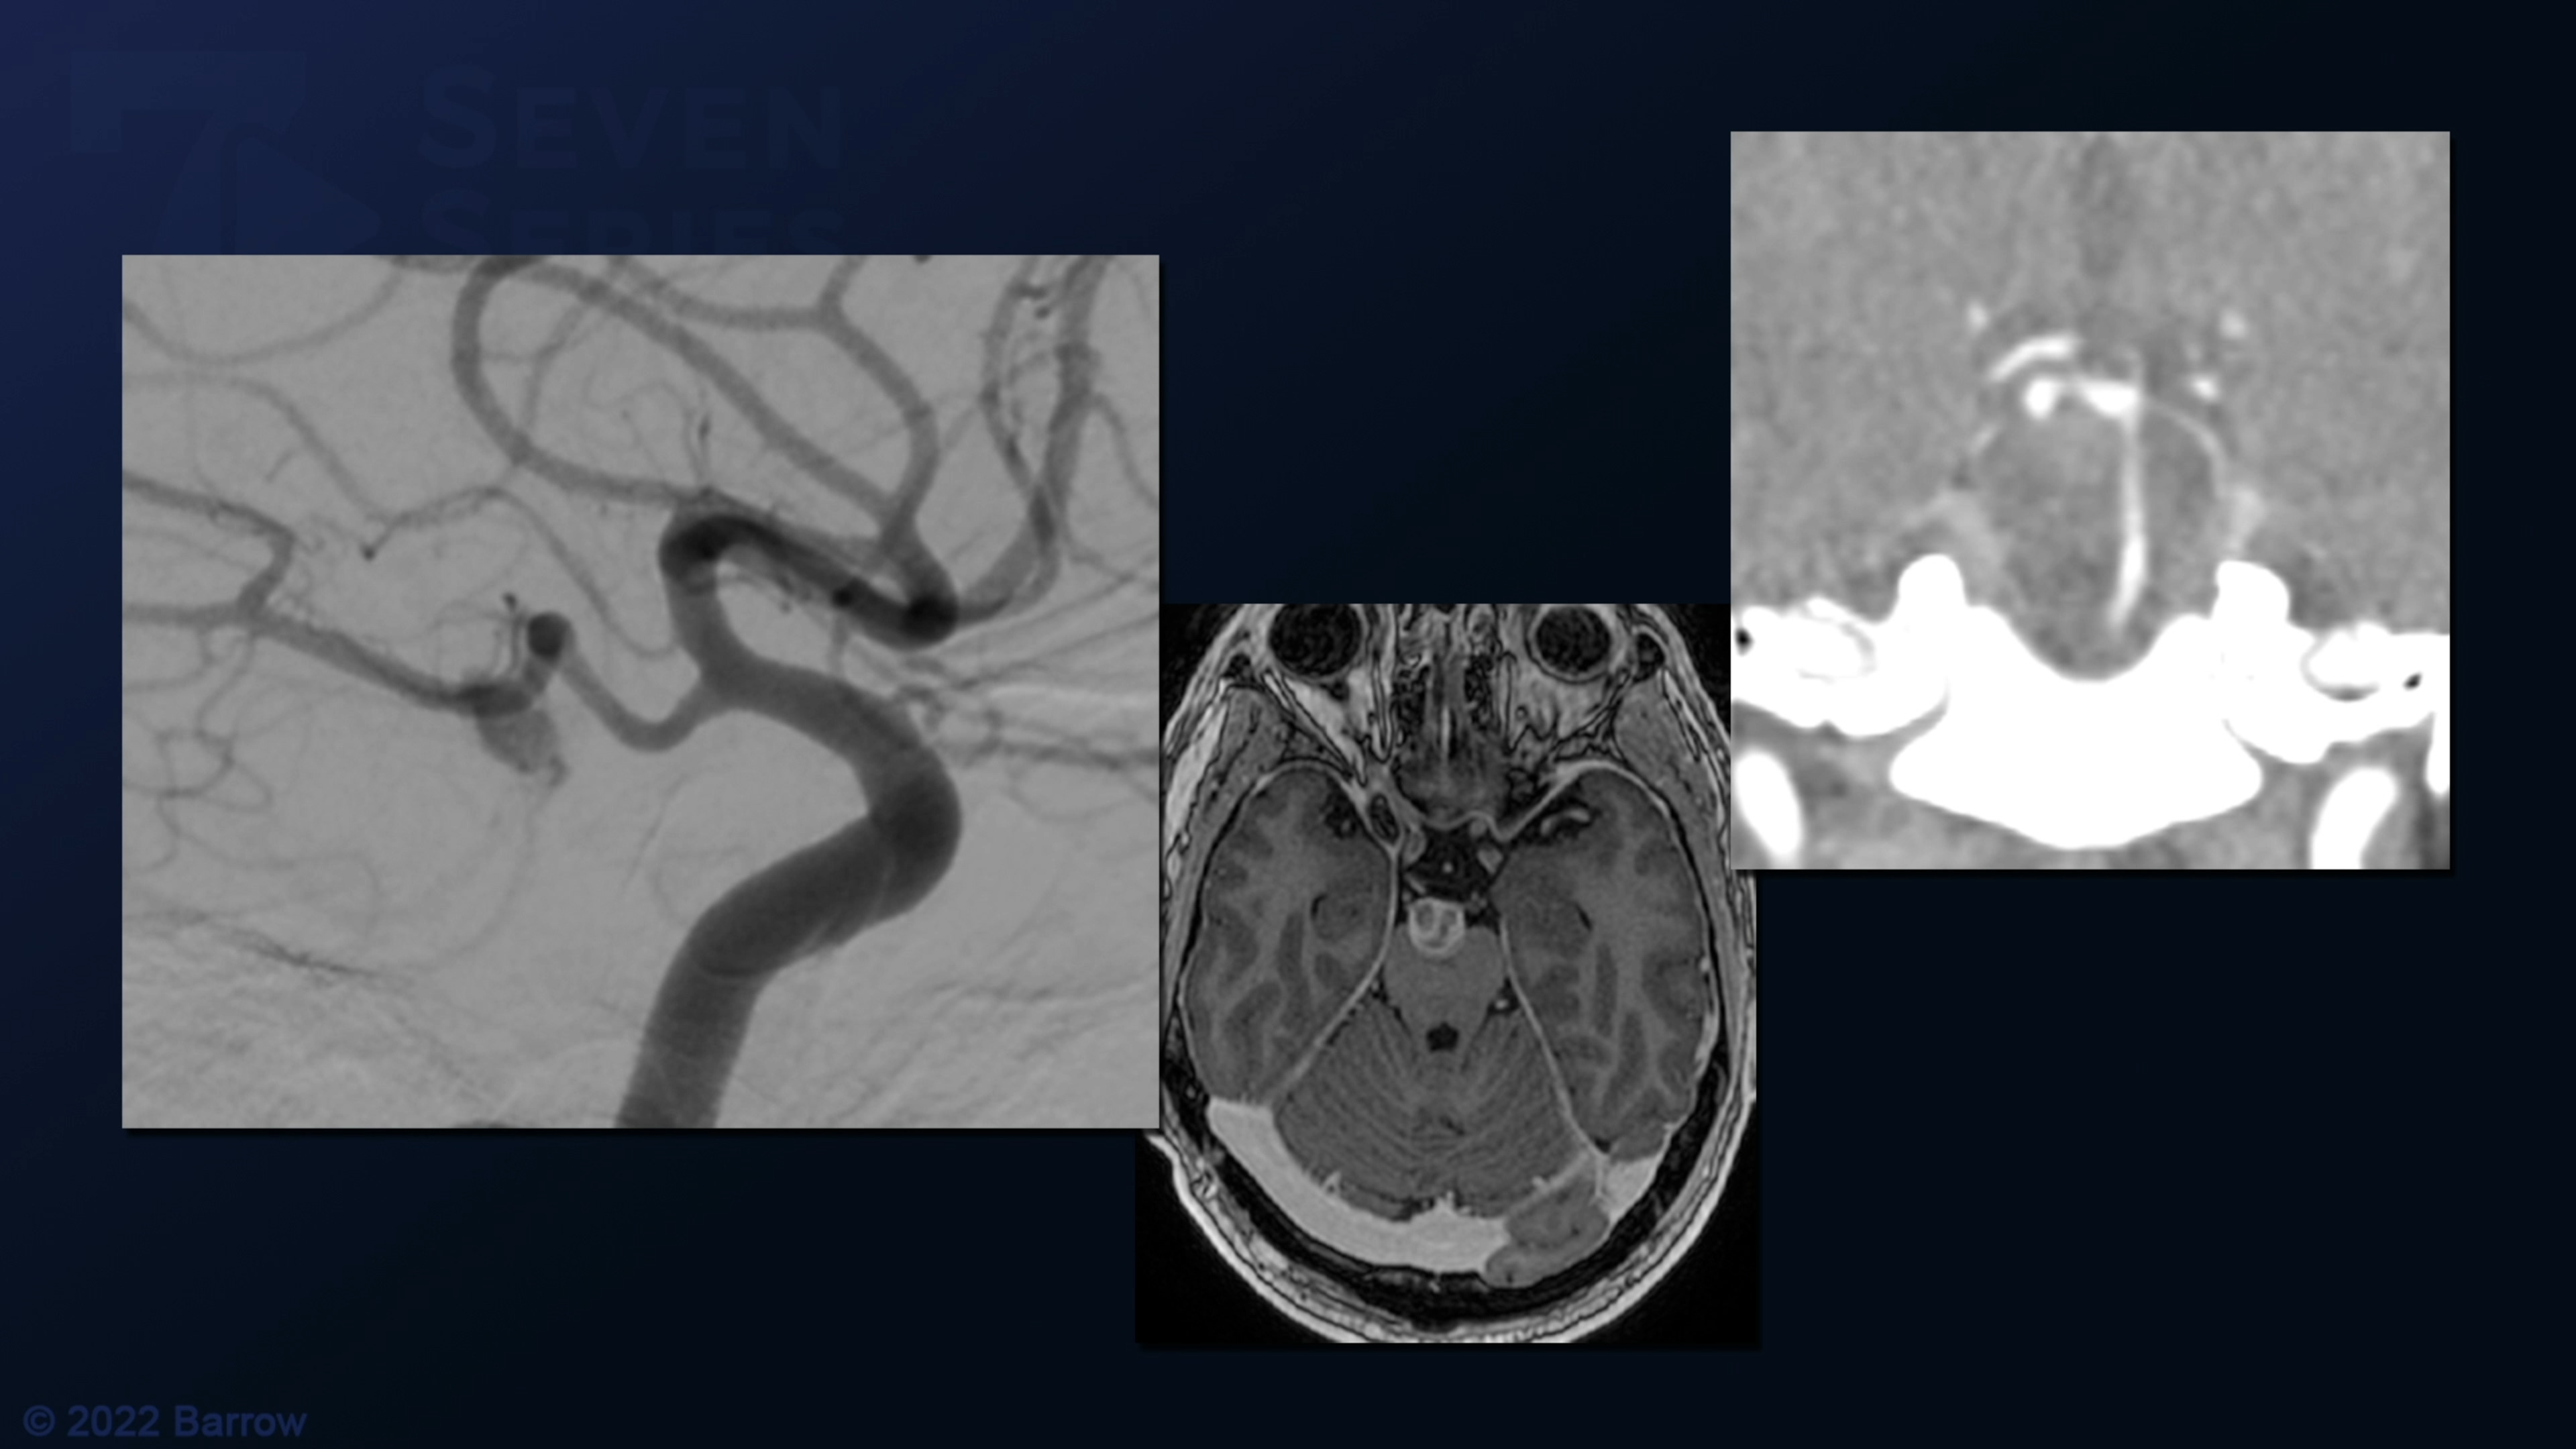 #125: Thrombotic Superior Cerebellar Artery Aneurysm Treated with STA-s2 SCA Bypass and Distal Clip Occlusion